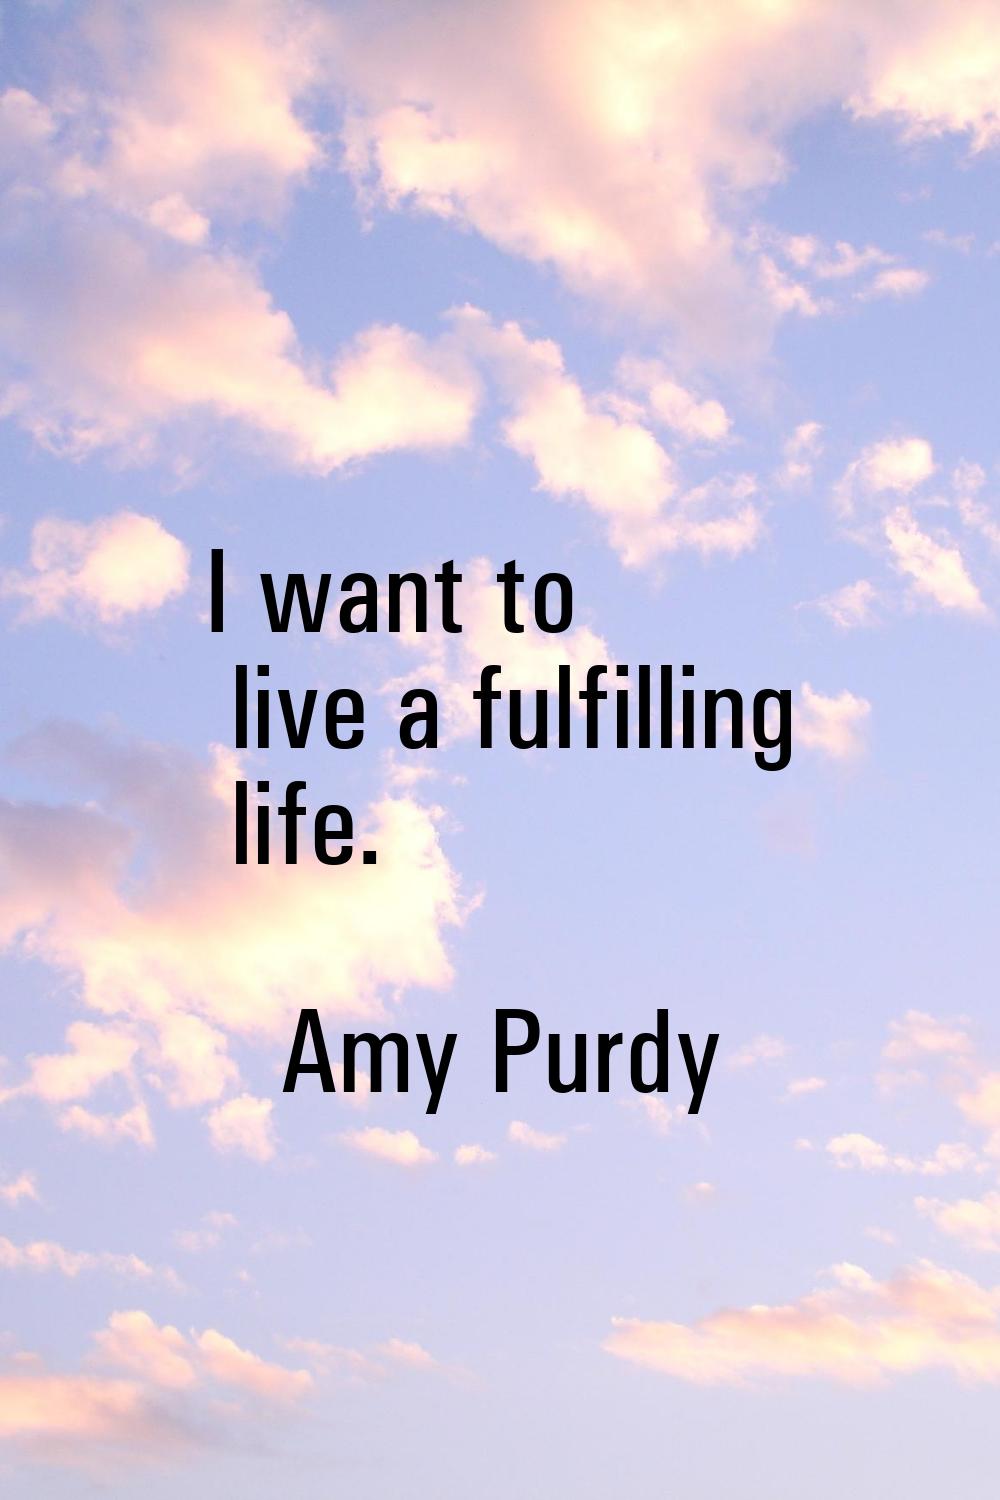 I want to live a fulfilling life.